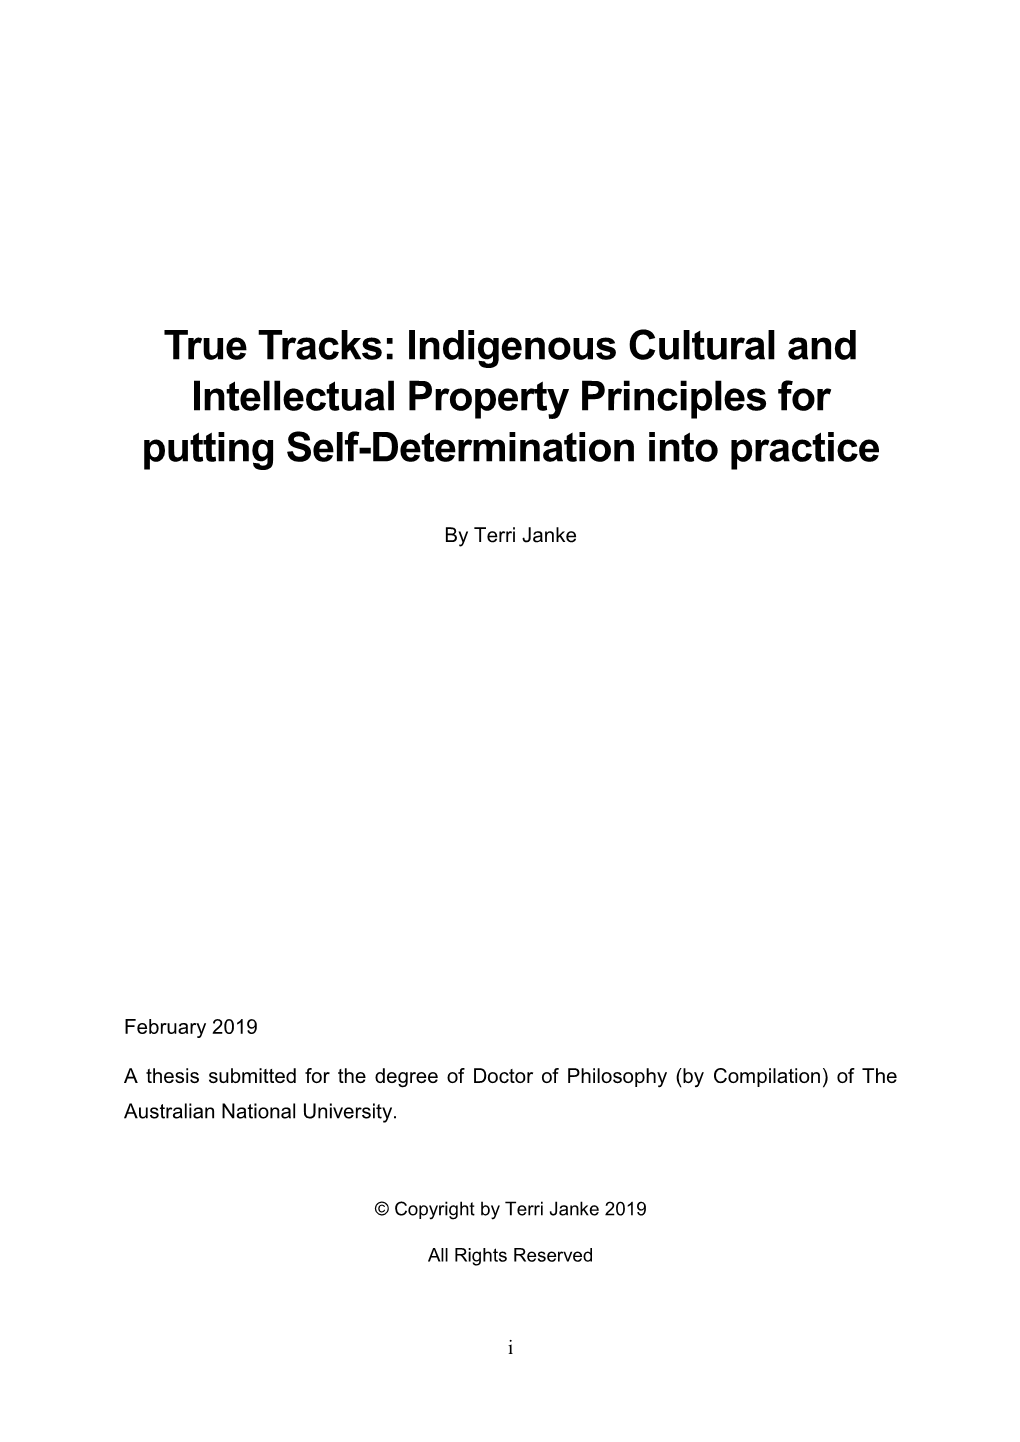 True Tracks: Indigenous Cultural and Intellectual Property Principles for Putting Self-Determination Into Practice